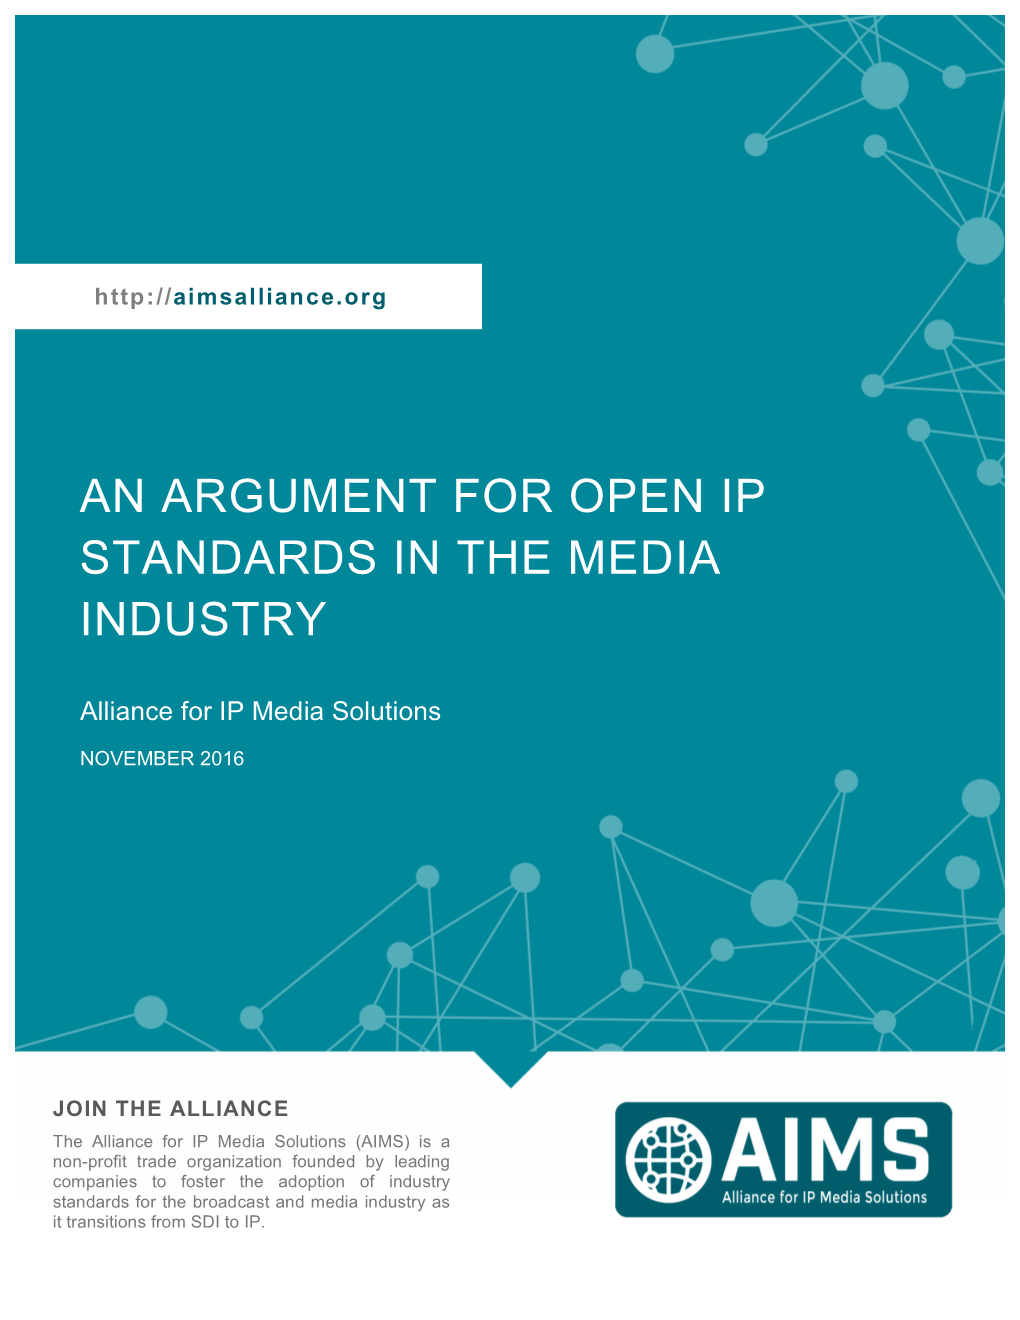 An Argument for Open Ip Standards in the Media